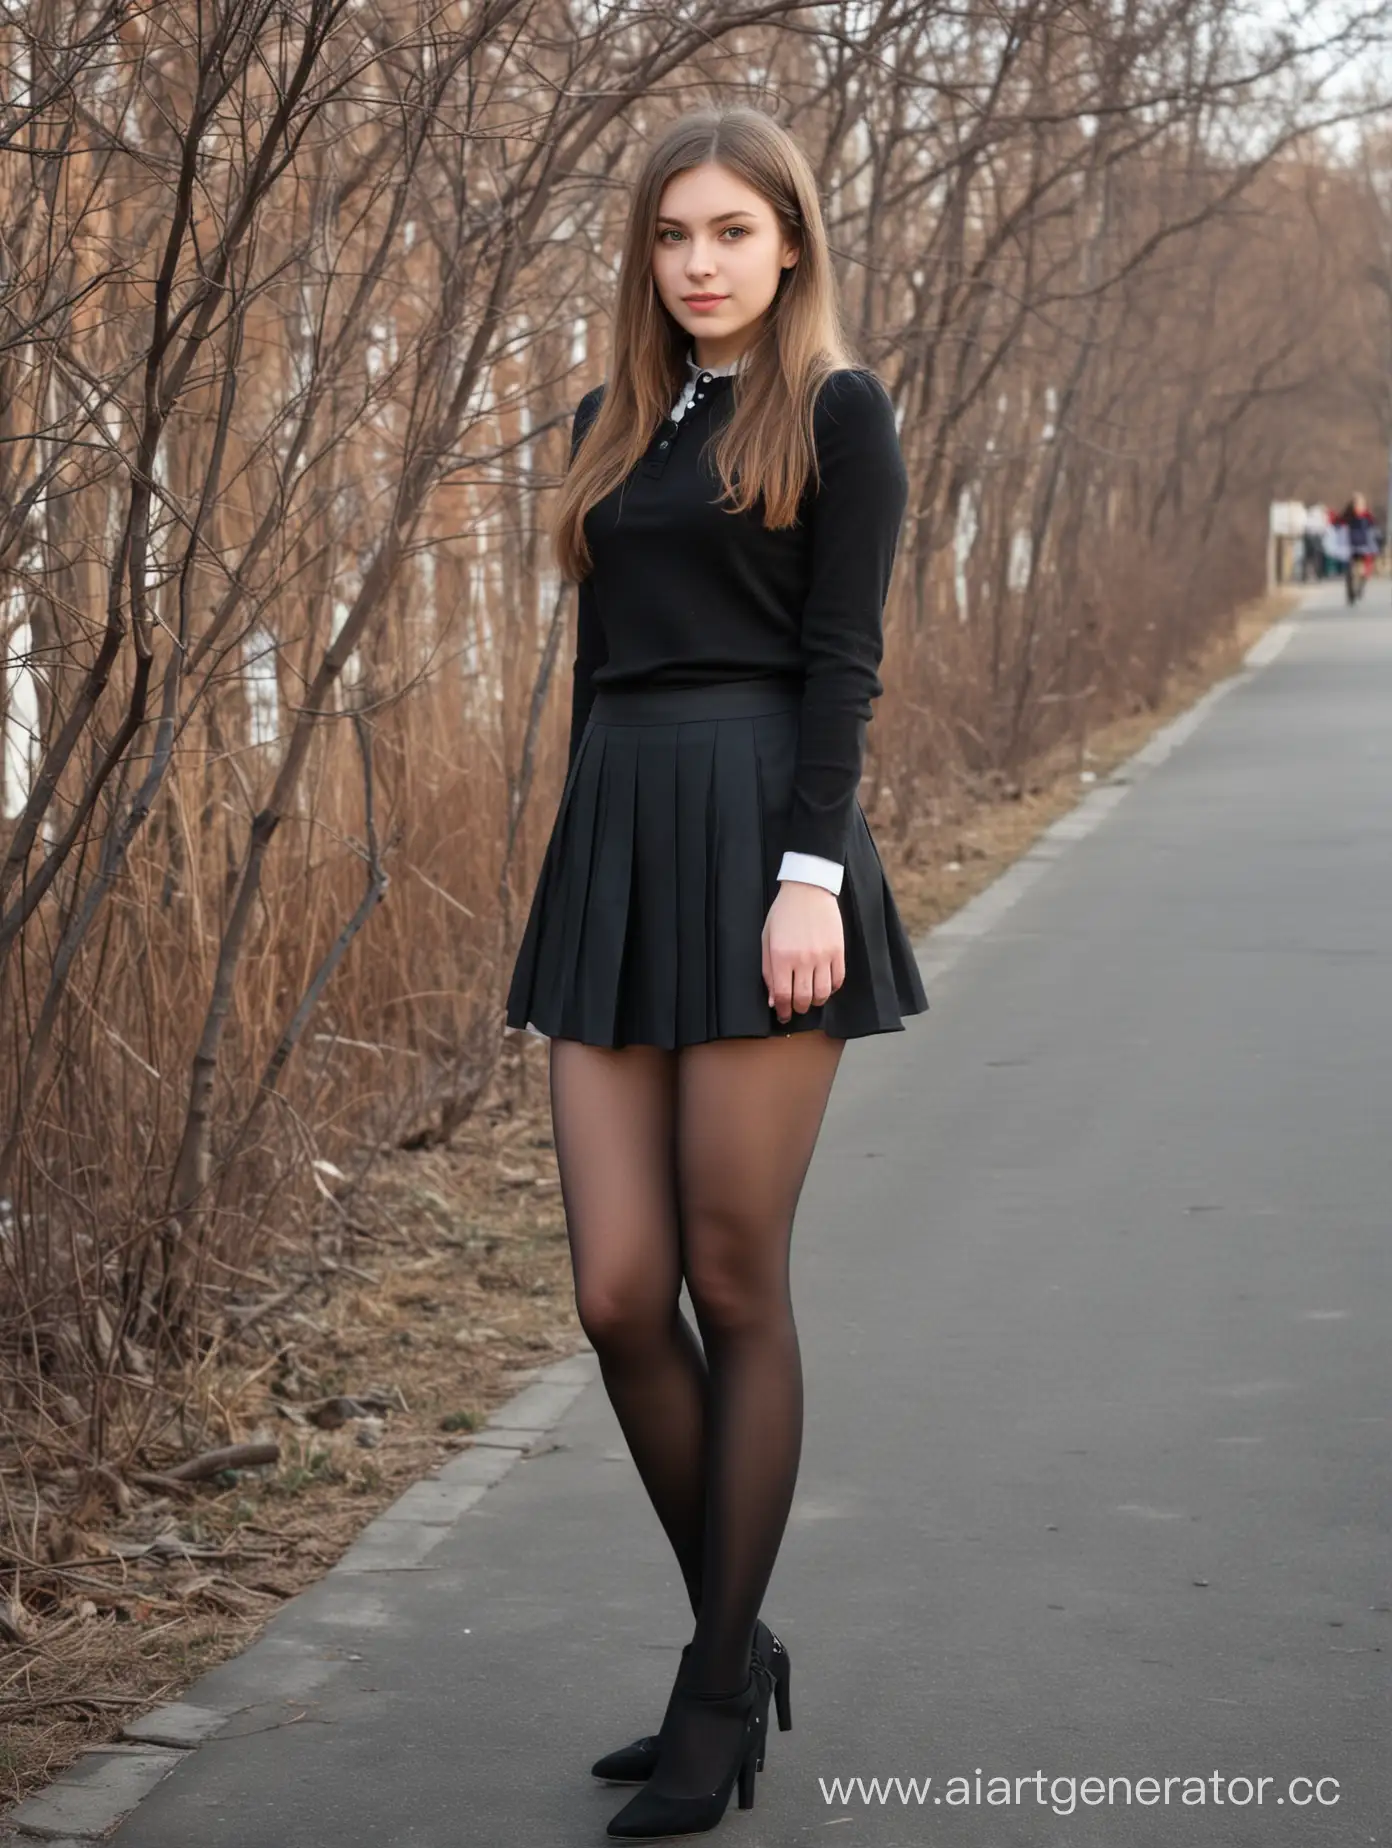 Elegant-Russian-Schoolgirl-in-Early-Spring-with-Short-Skirt-and-Black-Tights